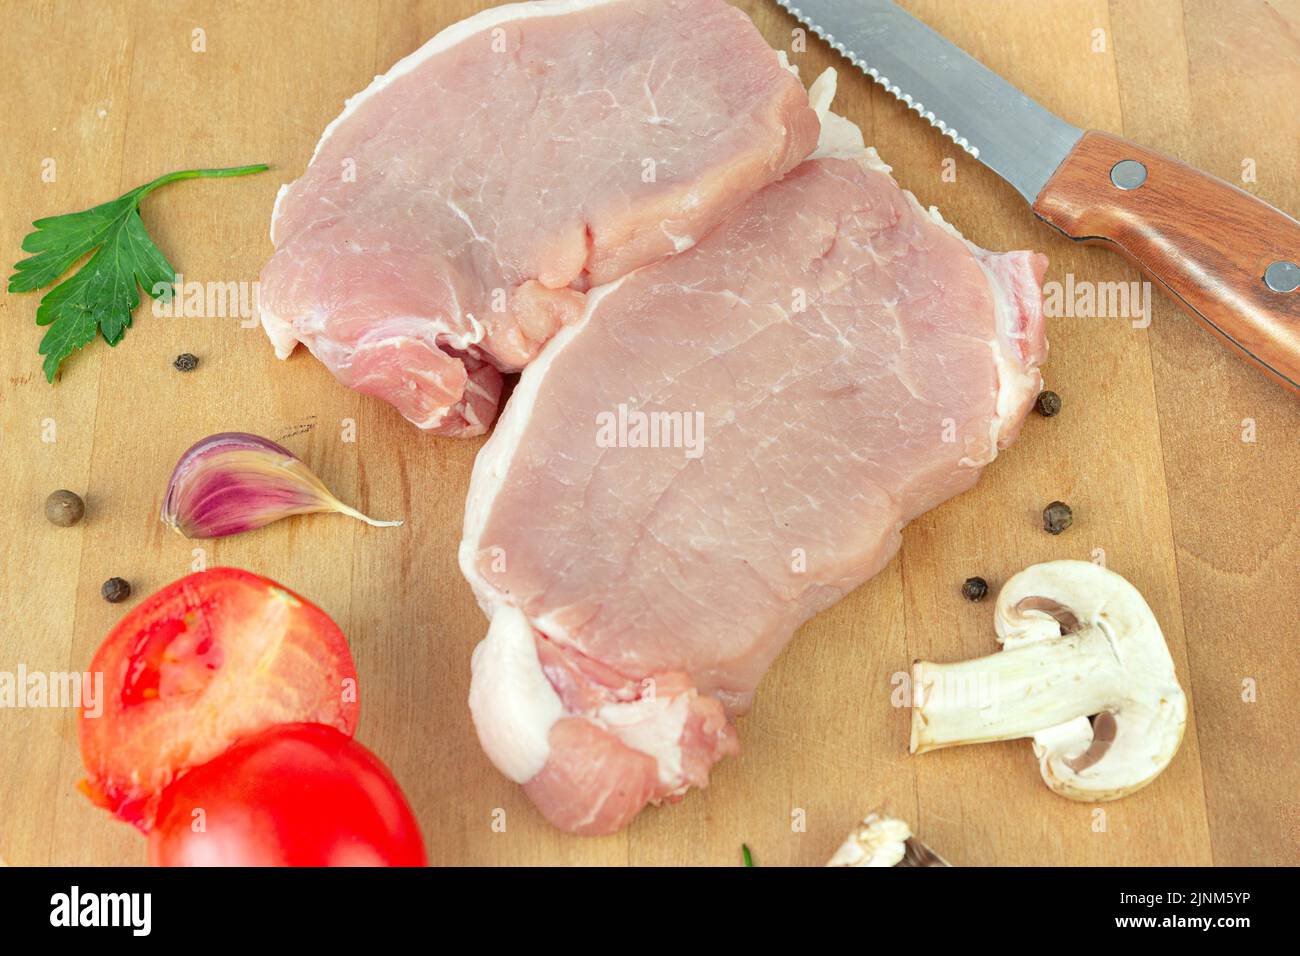 Raw pork chops of meat with garlic, tomato, spice, pepper, champignon on round cutting board with meat knife Stock Photo